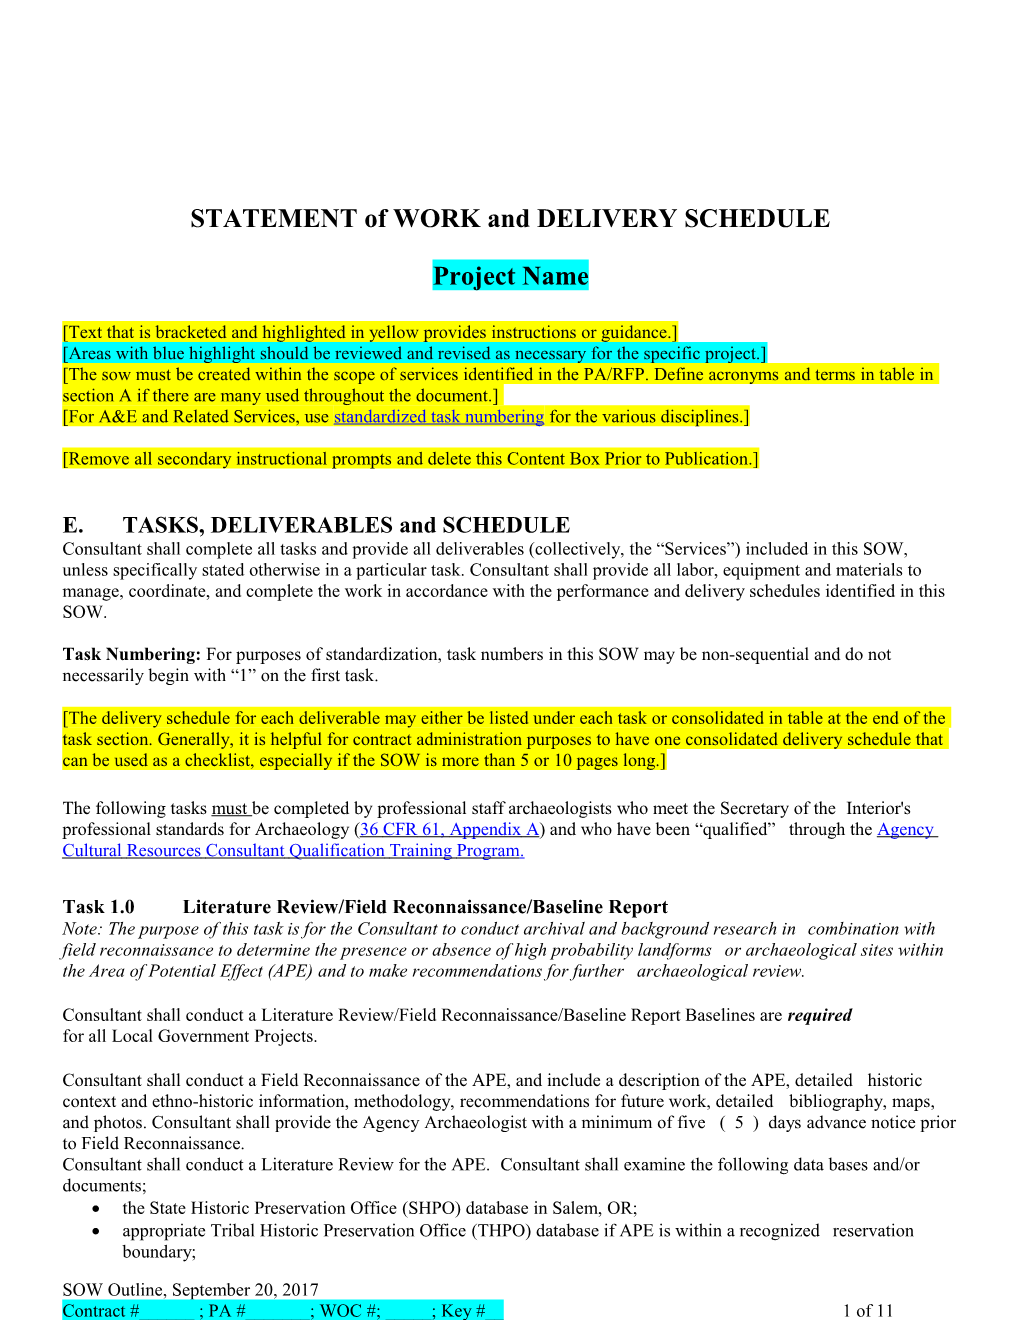 STATEMENT of WORK and DELIVERY SCHEDULE